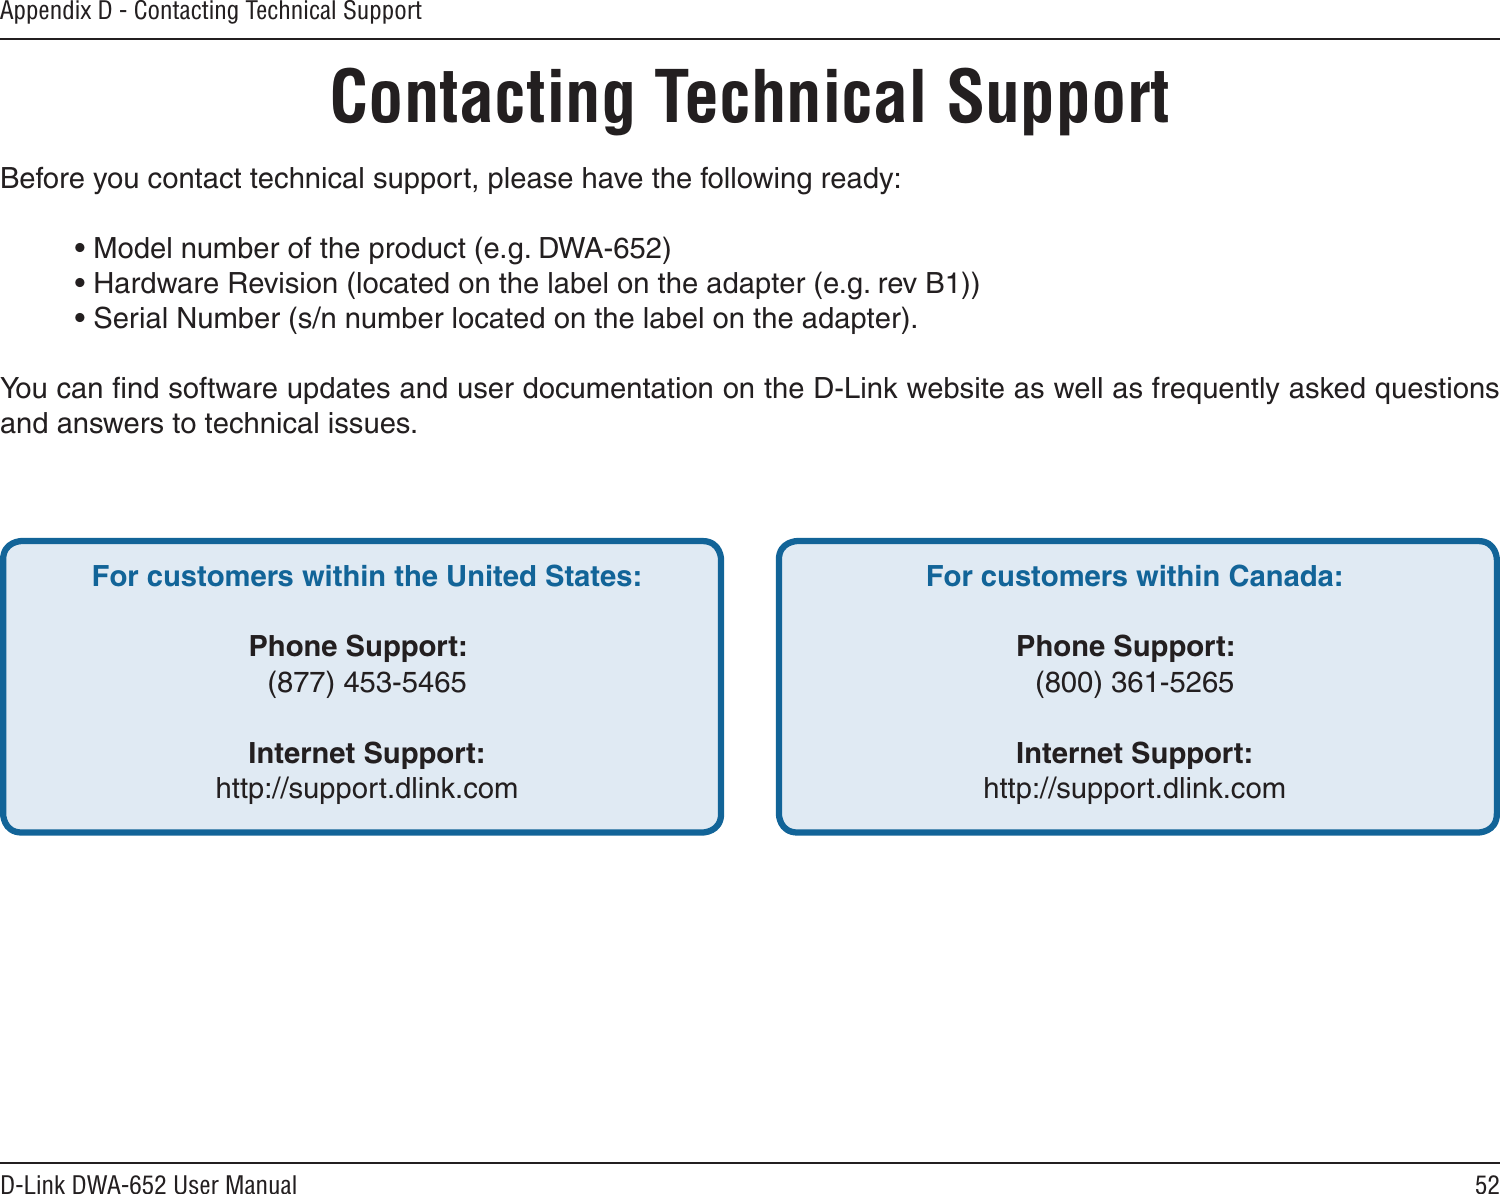 52D-Link DWA-652 User ManualAppendix D - Contacting Technical SupportContacting Technical SupportBefore you contact technical support, please have the following ready:  • Model number of the product (e.g. DWA-652)  • Hardware Revision (located on the label on the adapter (e.g. rev B1))  • Serial Number (s/n number located on the label on the adapter). You can ﬁnd software updates and user documentation on the D-Link website as well as frequently asked questions and answers to technical issues.For customers within the United States: Phone Support:  (877) 453-5465 Internet Support:  http://support.dlink.com For customers within Canada: Phone Support:  (800) 361-5265    Internet Support:  http://support.dlink.com 